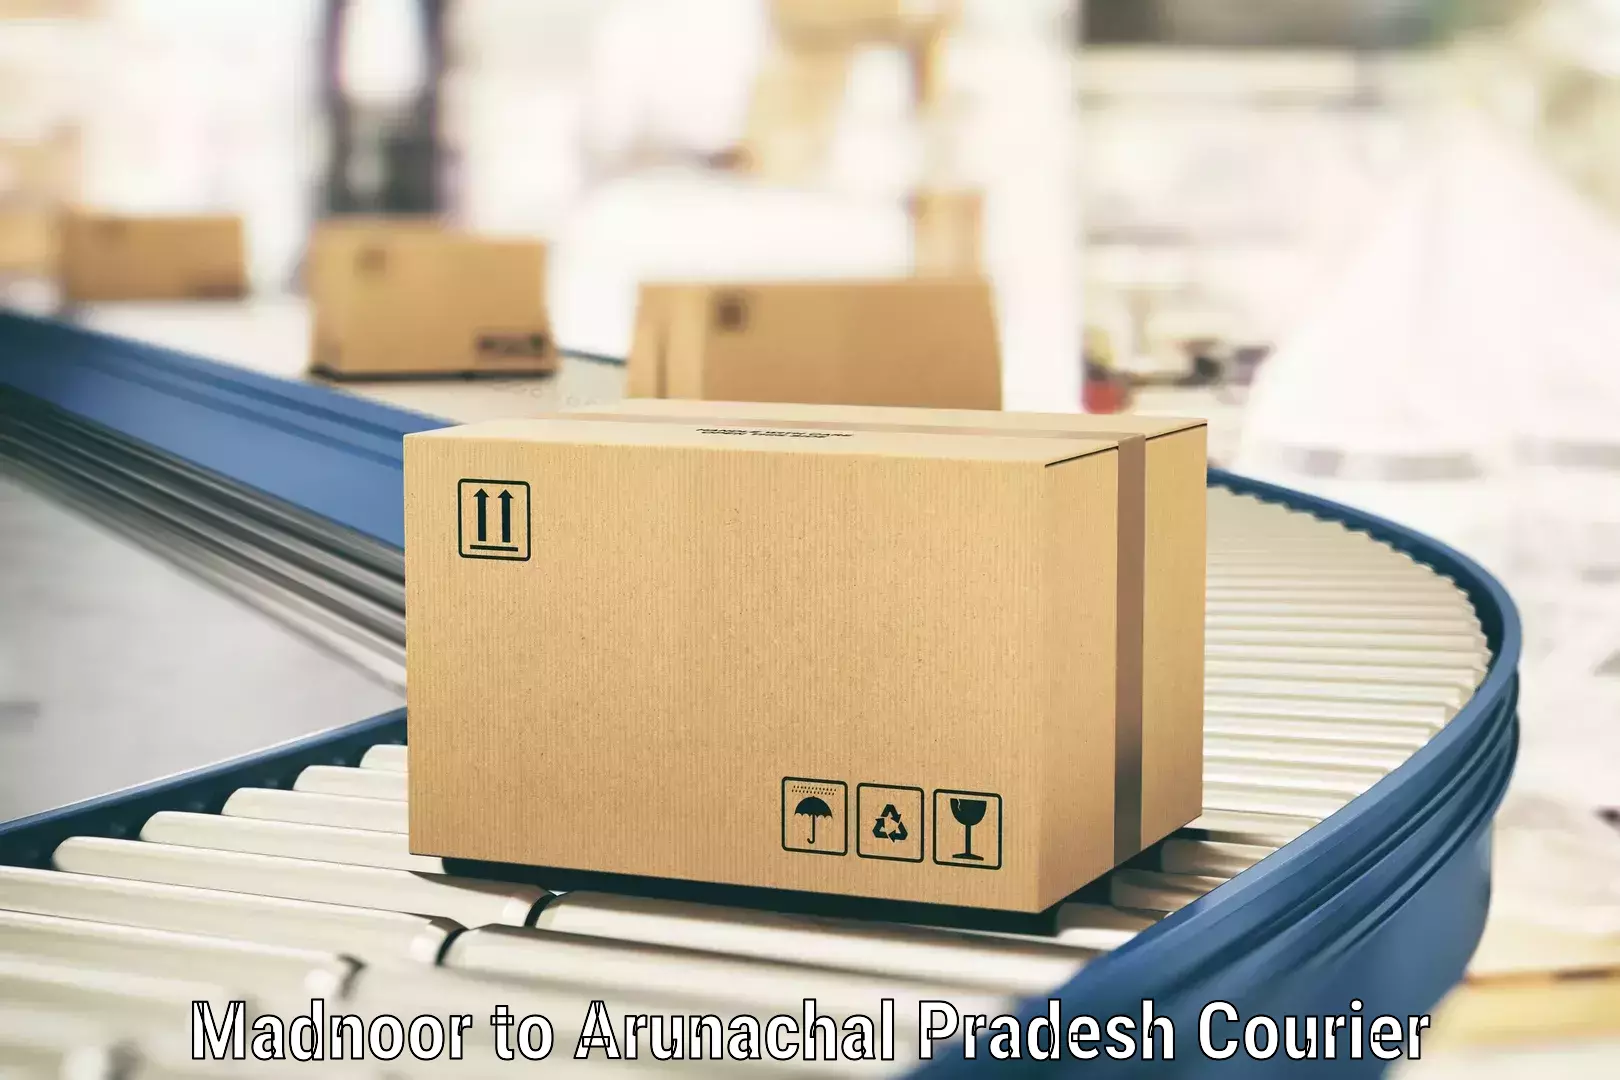 State-of-the-art courier technology Madnoor to Sagalee